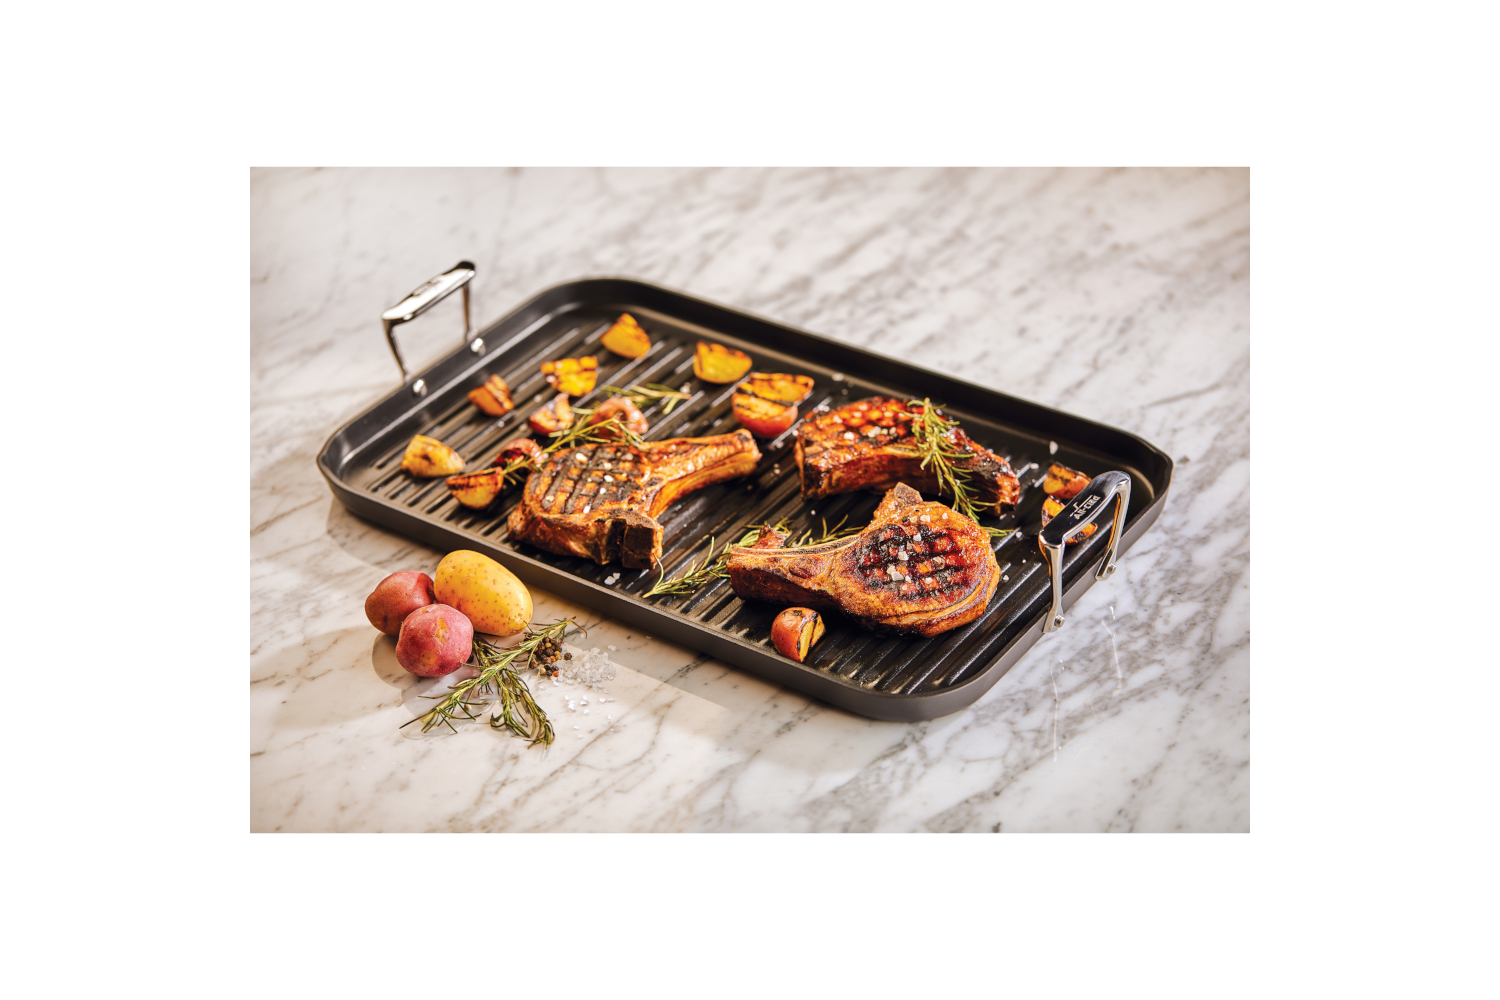 HA1 Hard Anodized Nonstick Cookware, Roaster with Rack, 13 x 16 inch